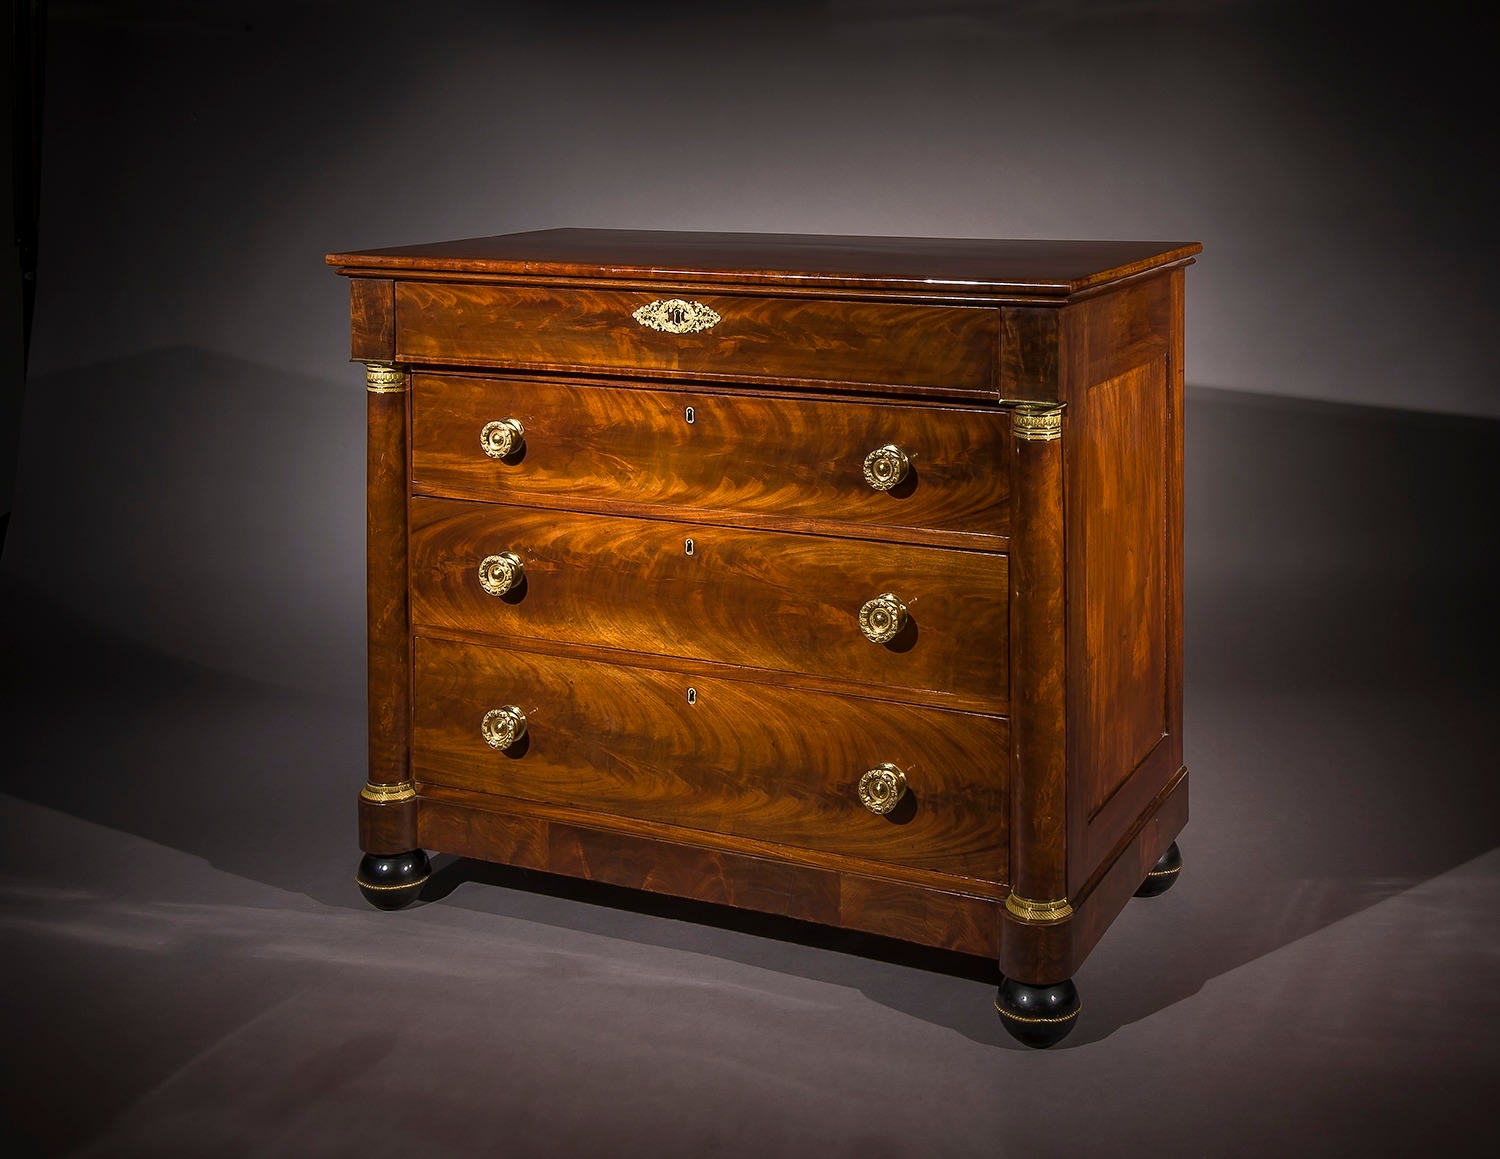 Chest of Drawers, about 1820